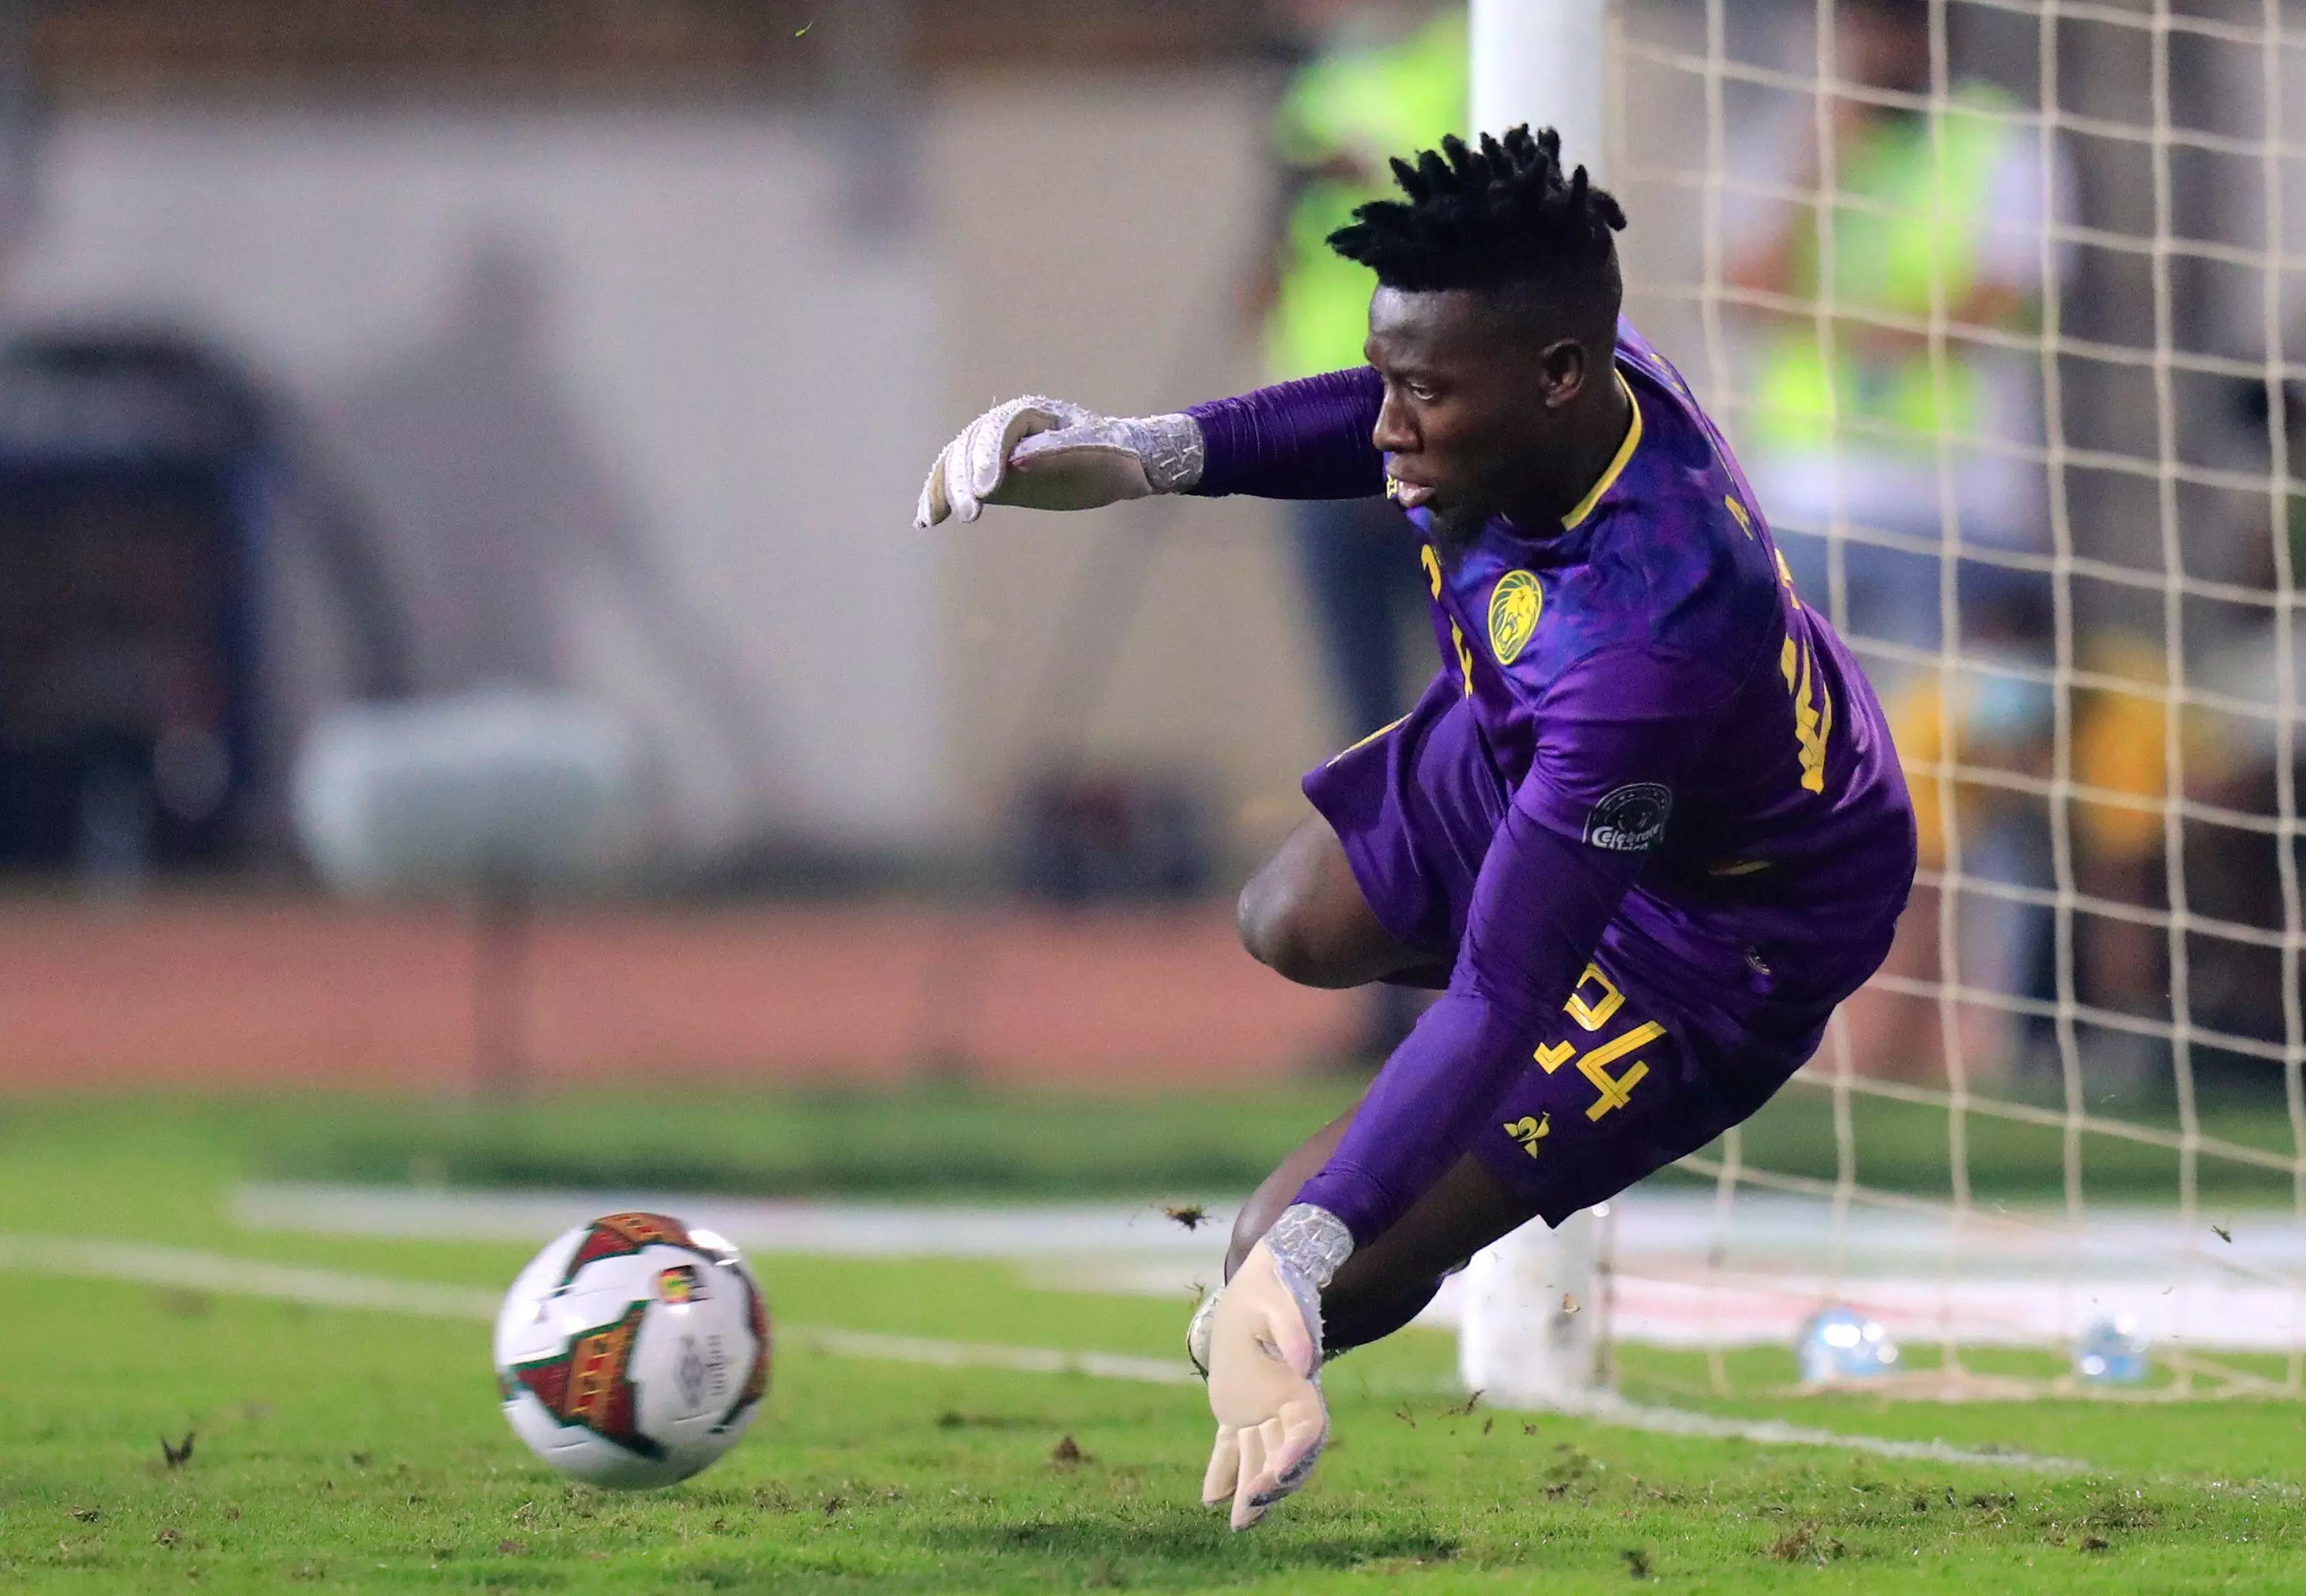 Onana makes a save during the Africa Cup of Nations. Image: PA Images